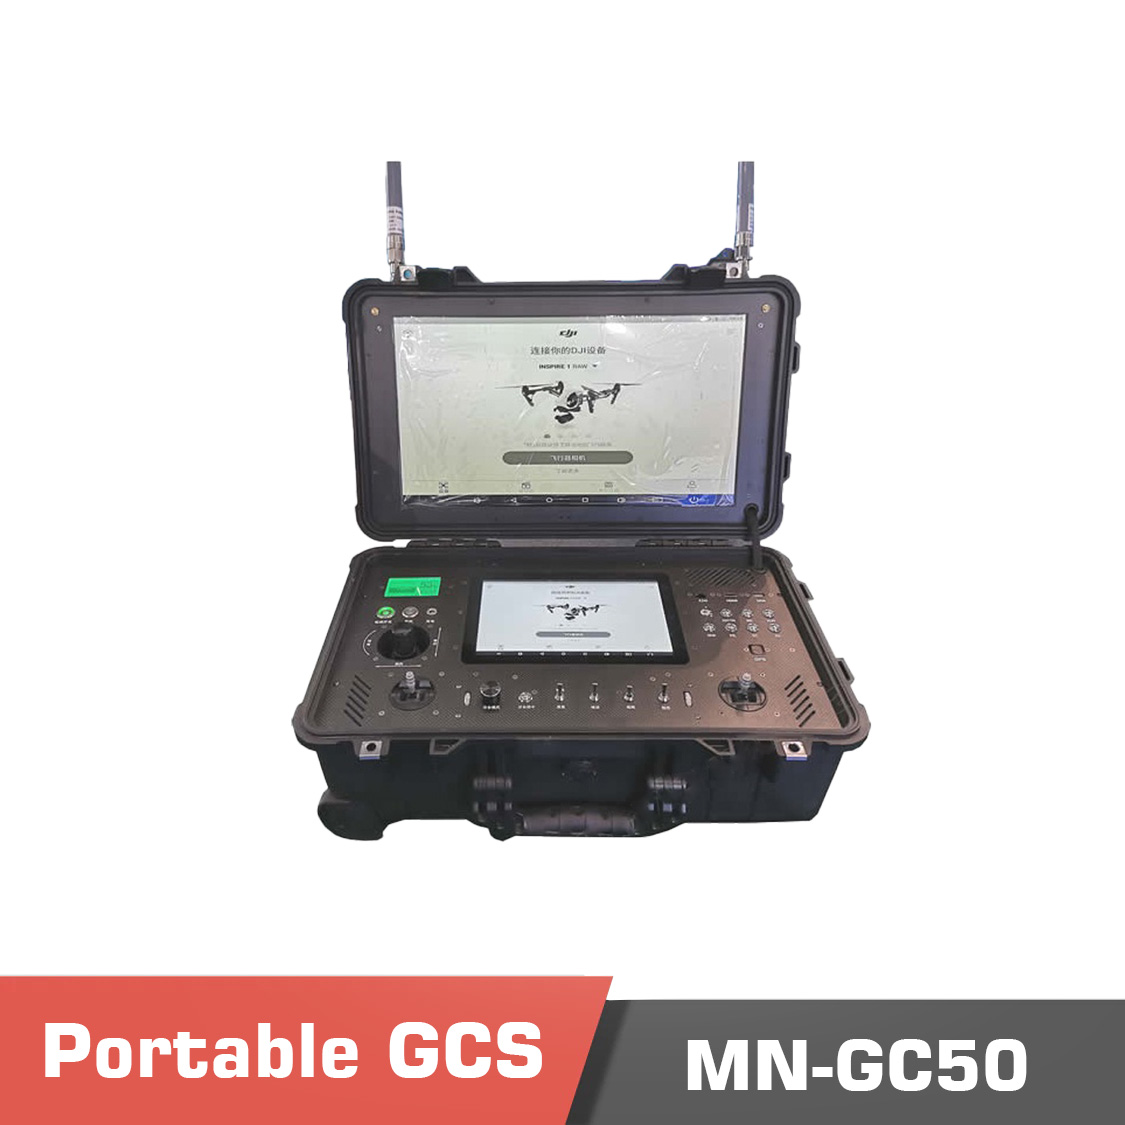 Mn gc50 t1 - t50 gcs,handheld ground control station,ground control station,suitcase gcs,gcs,radio control,high brightness,high resolution,high brightness screen,1040nit brightness,1000nit brightness,video transmission,control system,data transmission,rc access,ideal for harsh environment,long-range,transparent transmission,lan port,multiple programming mode,remote control,various external input,dual screen,dual screen gcs - motionew - 1